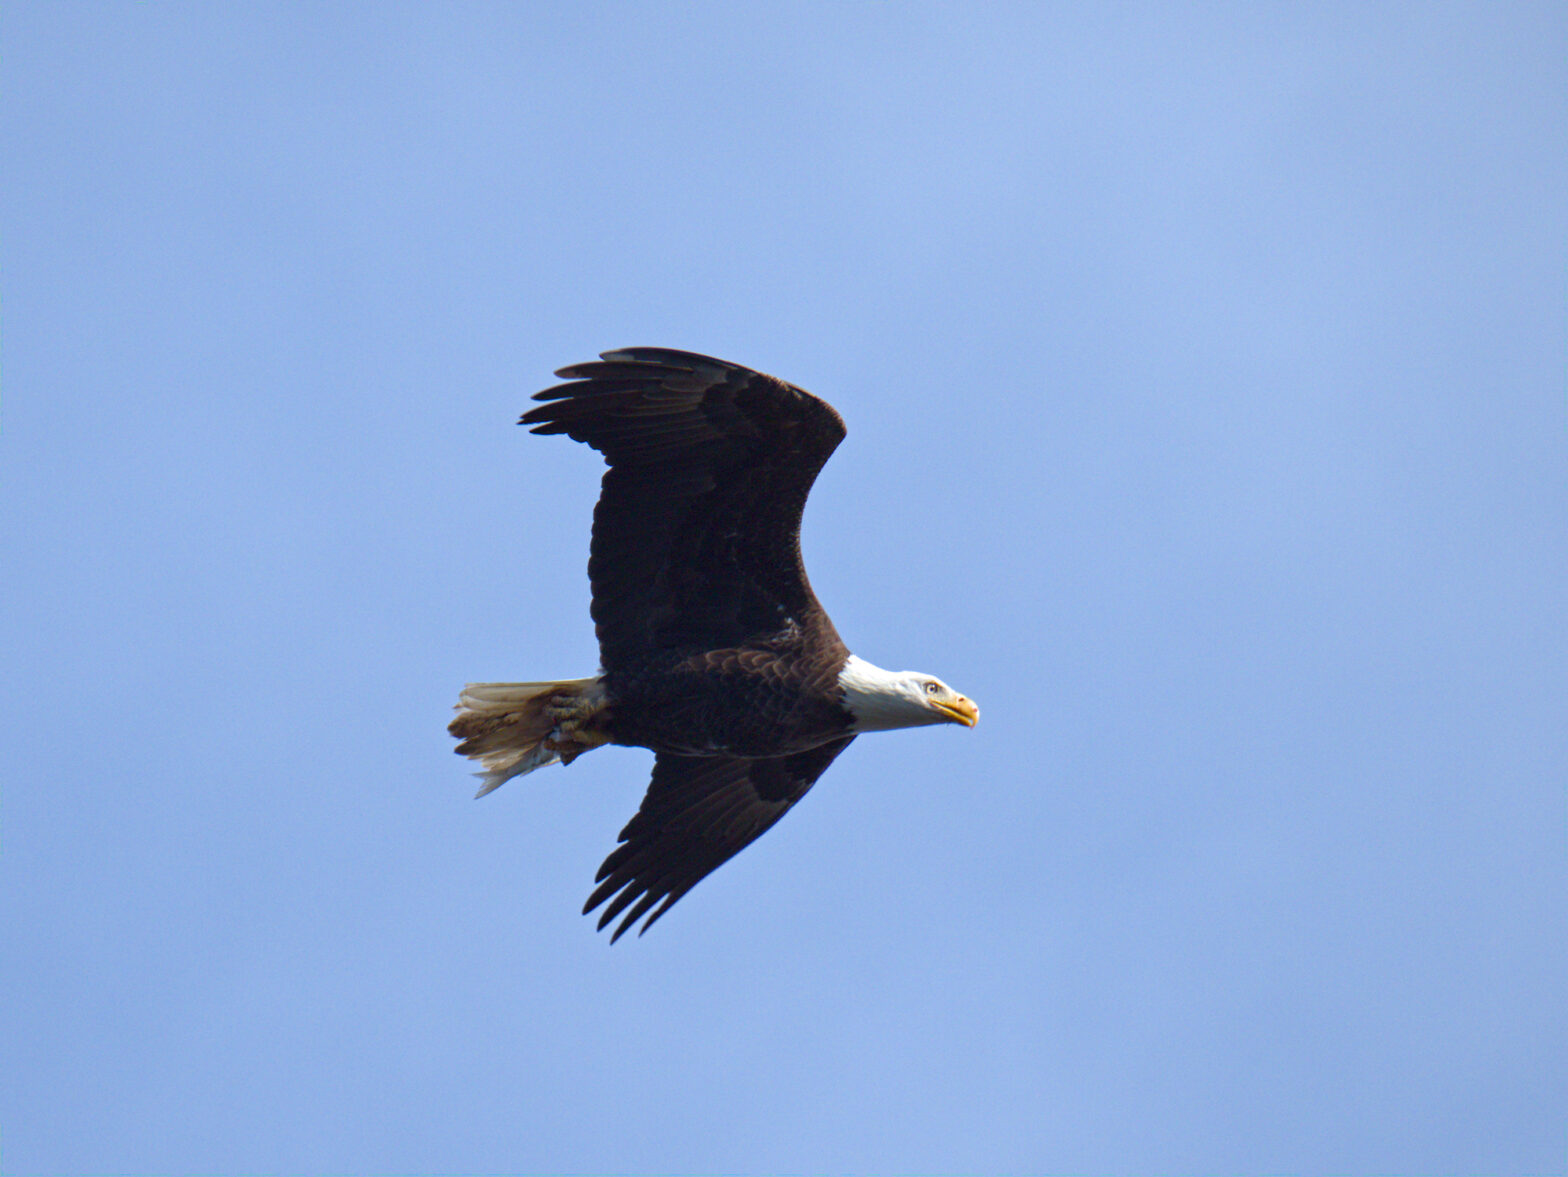 A side profile of a bald eagle in flight against clear blue sky